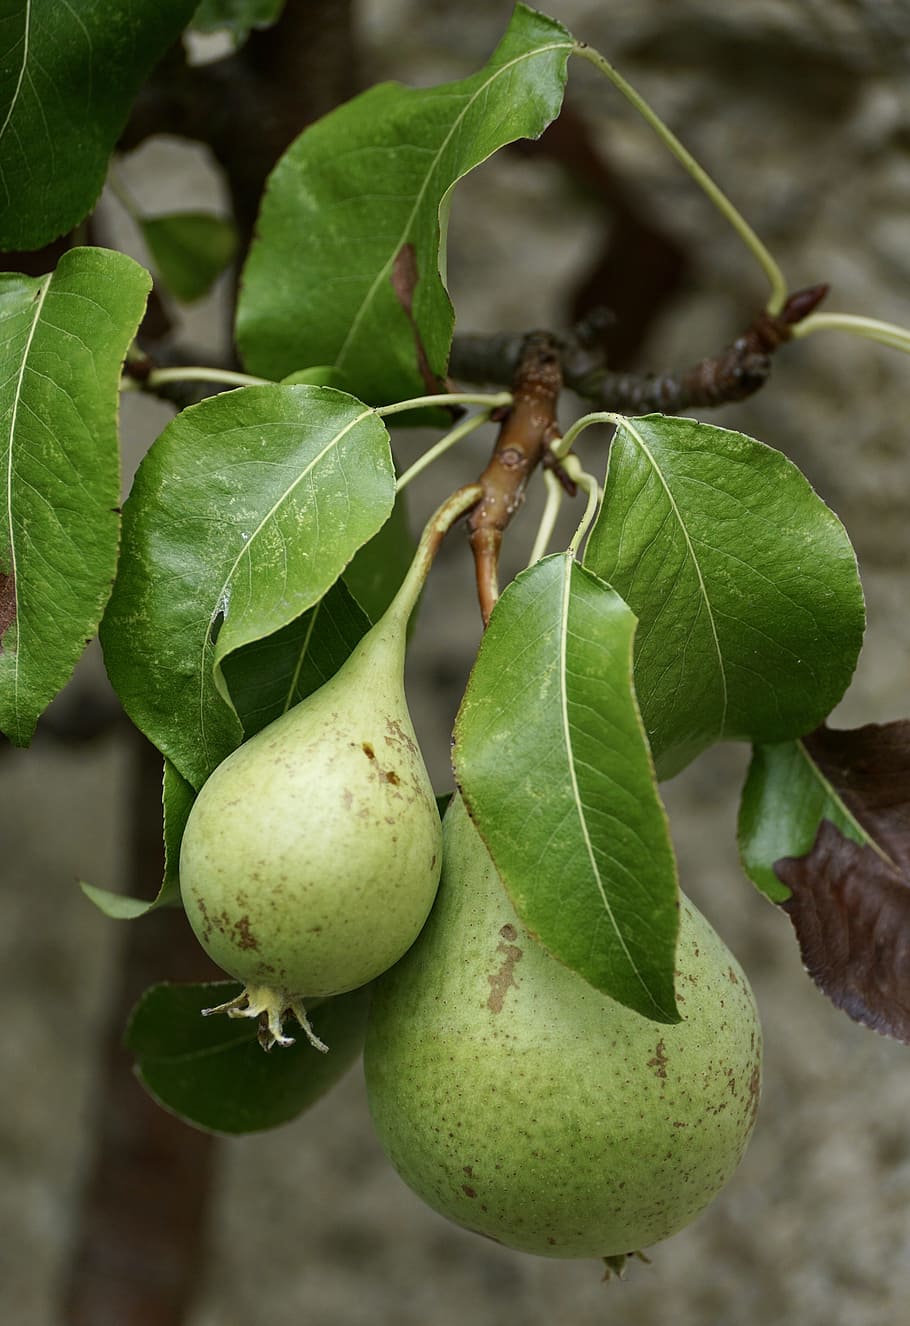 pears, green, fruit, fruits, vitamins, nature, branch, espalier tree, grow, thrive